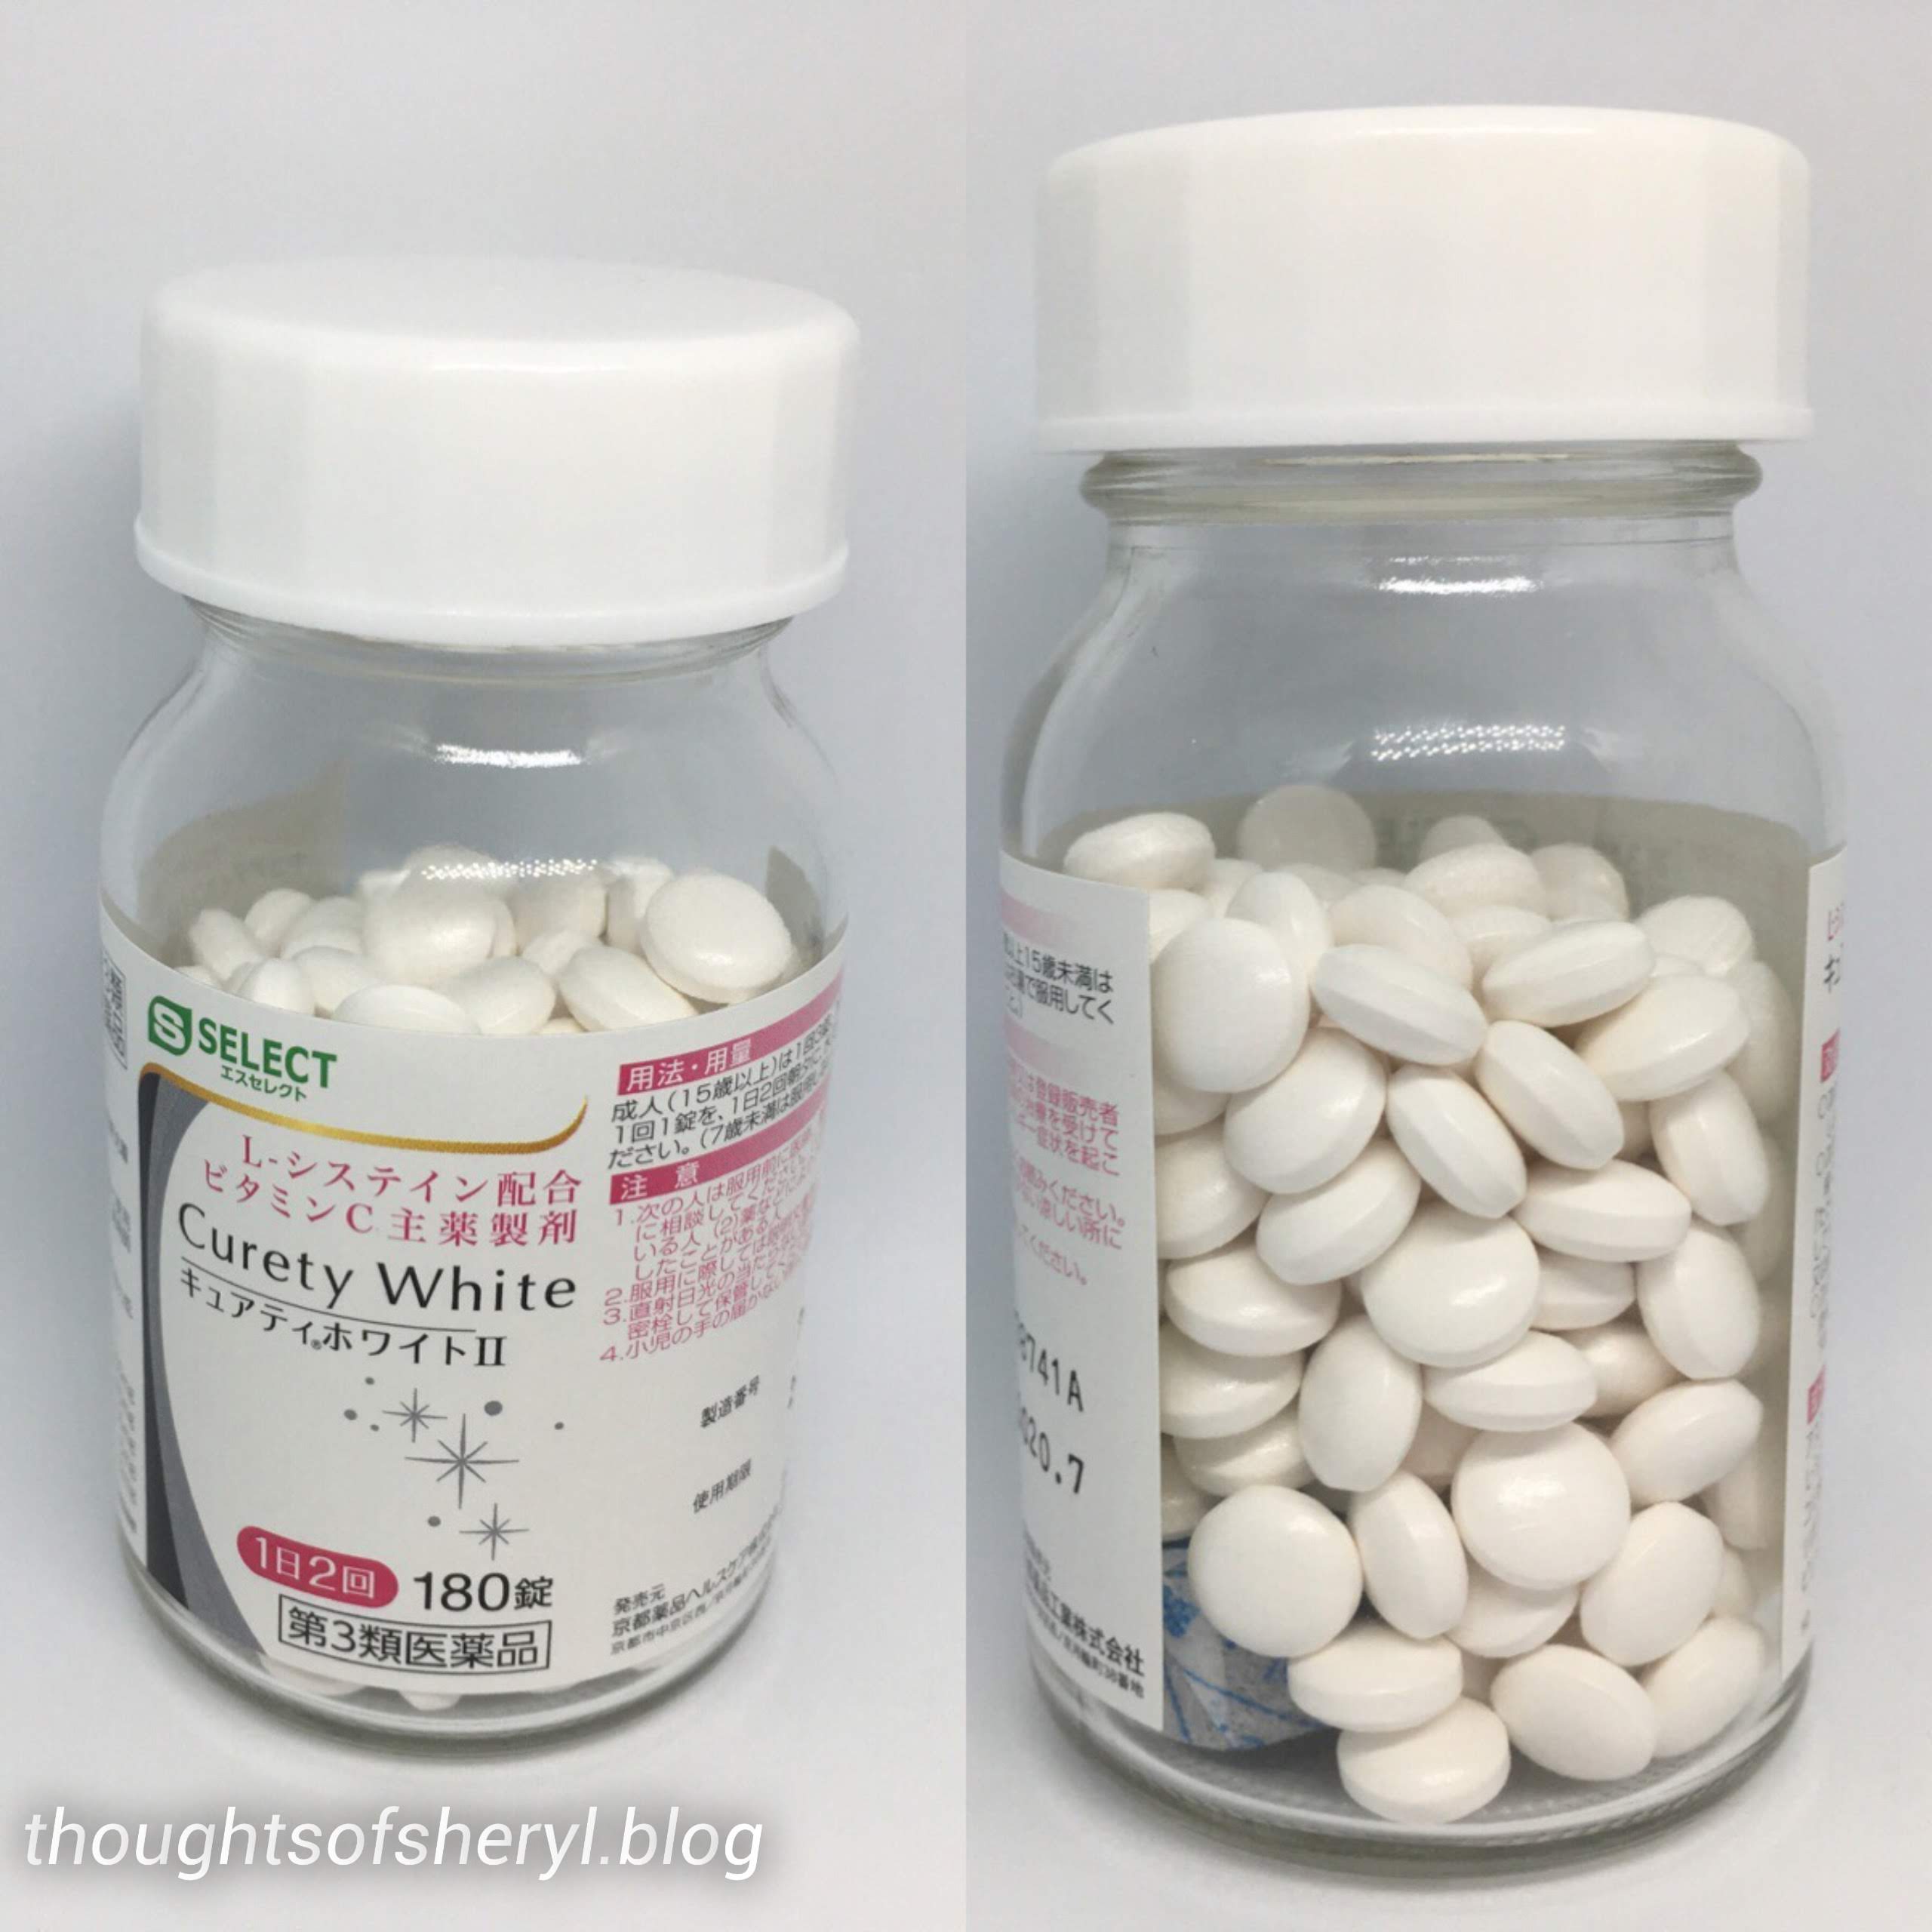 select curety white capsule